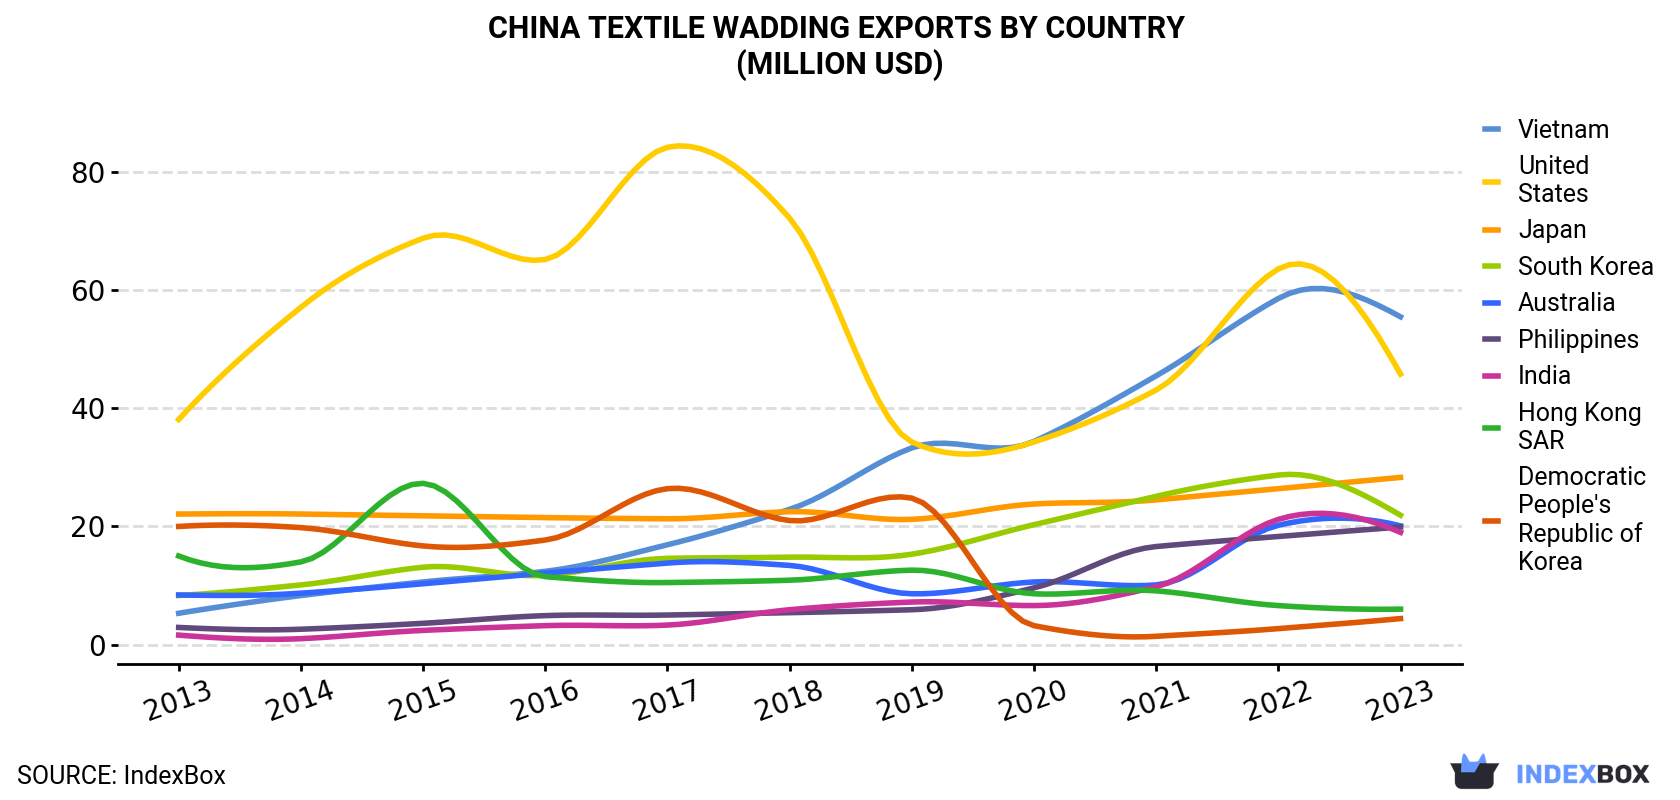 China Textile Wadding Exports By Country (Million USD)